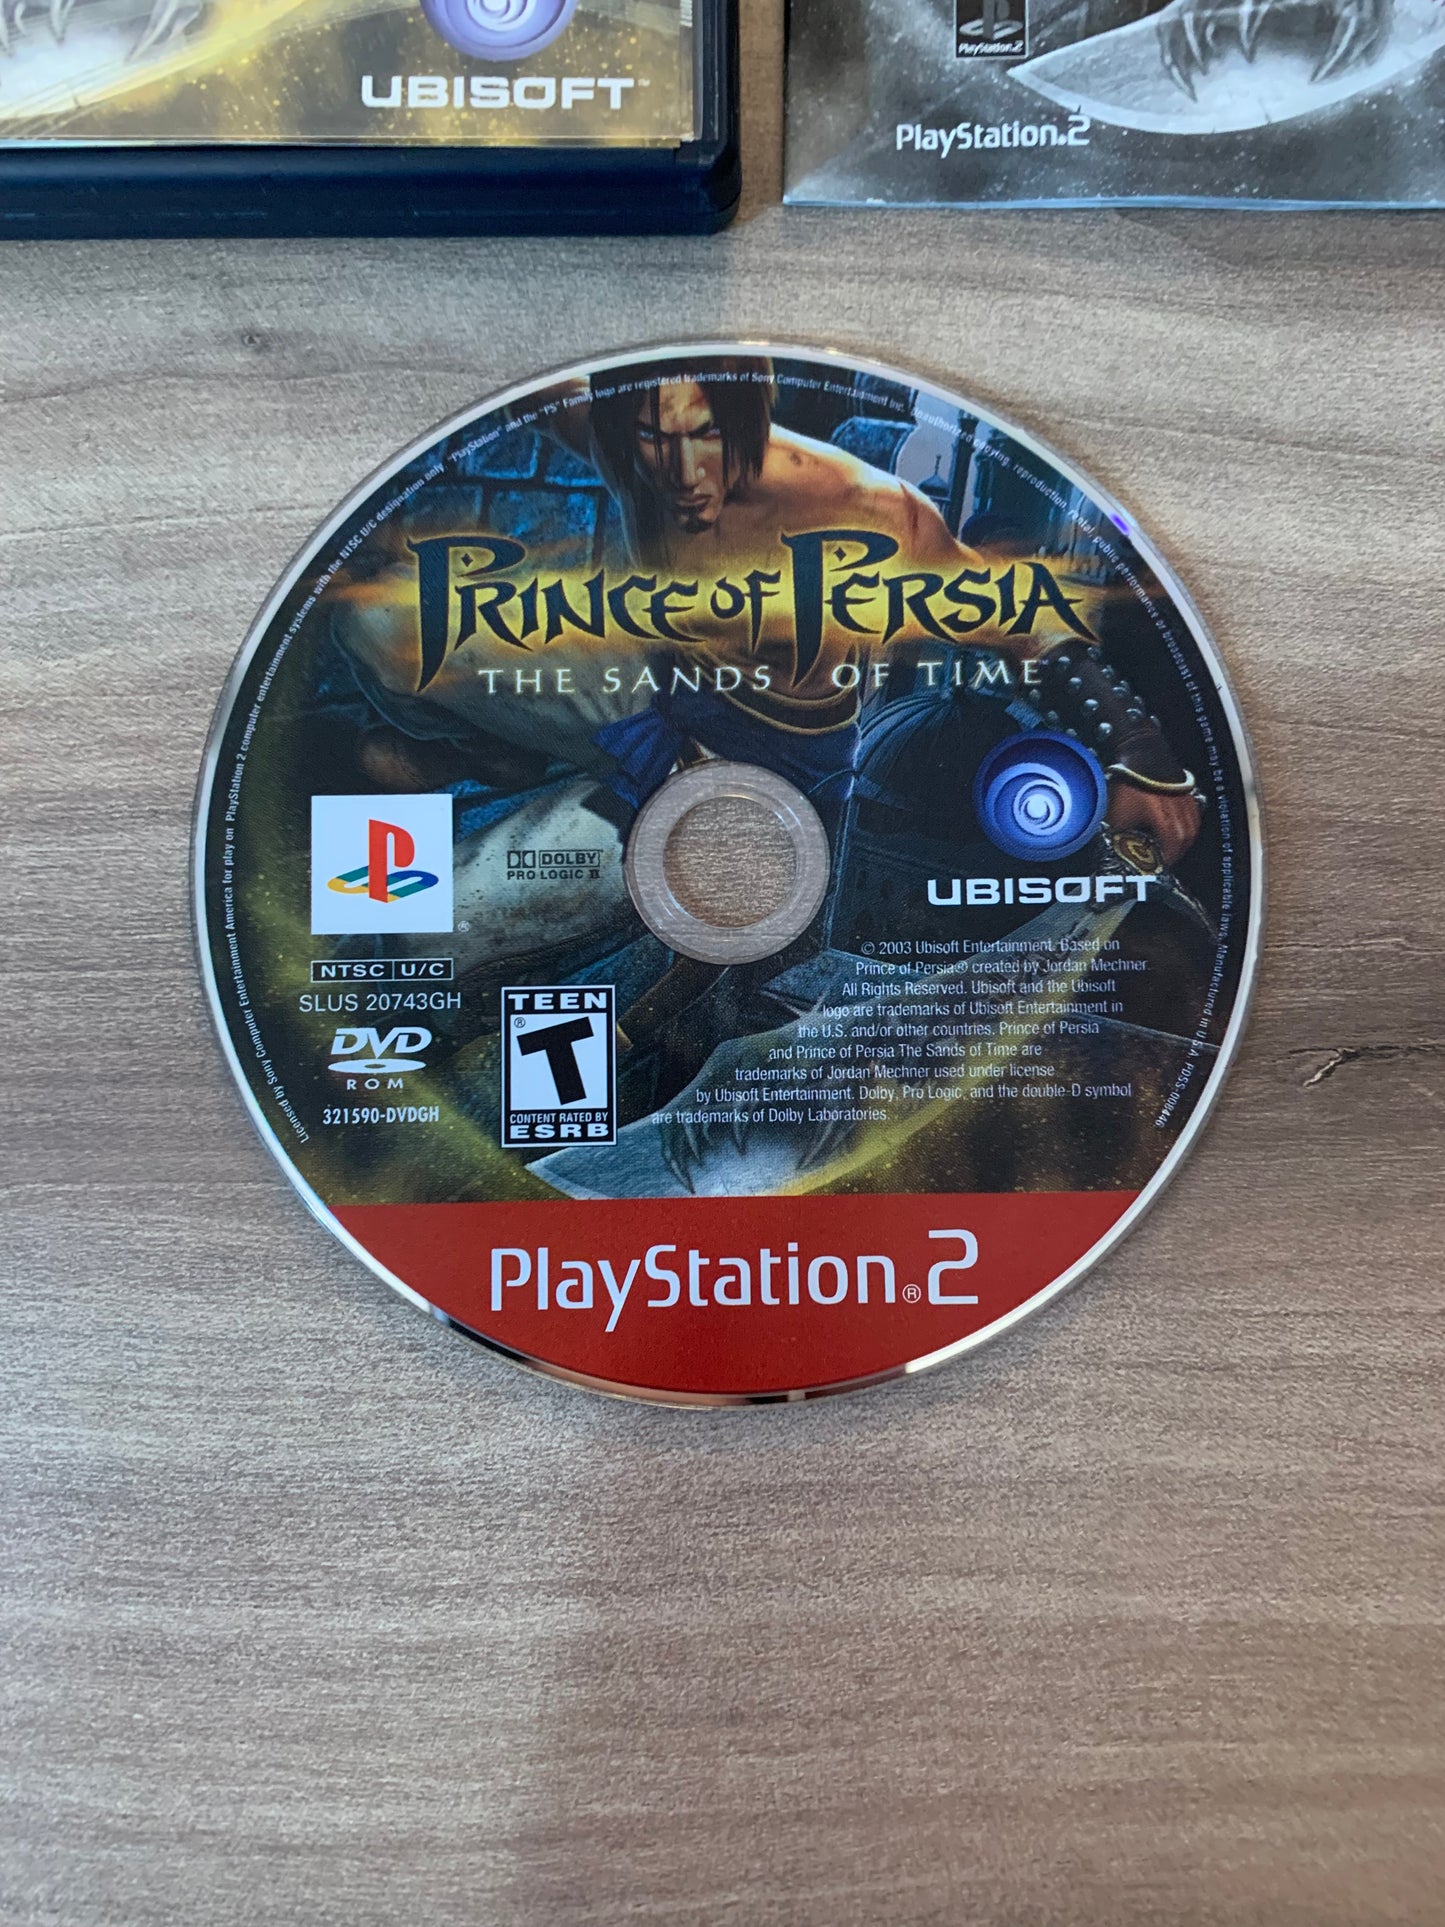 SONY PLAYSTATiON 2 [PS2] | PRiNCE OF PERSiA THE SANDS OF TiME | GREATEST HiTS